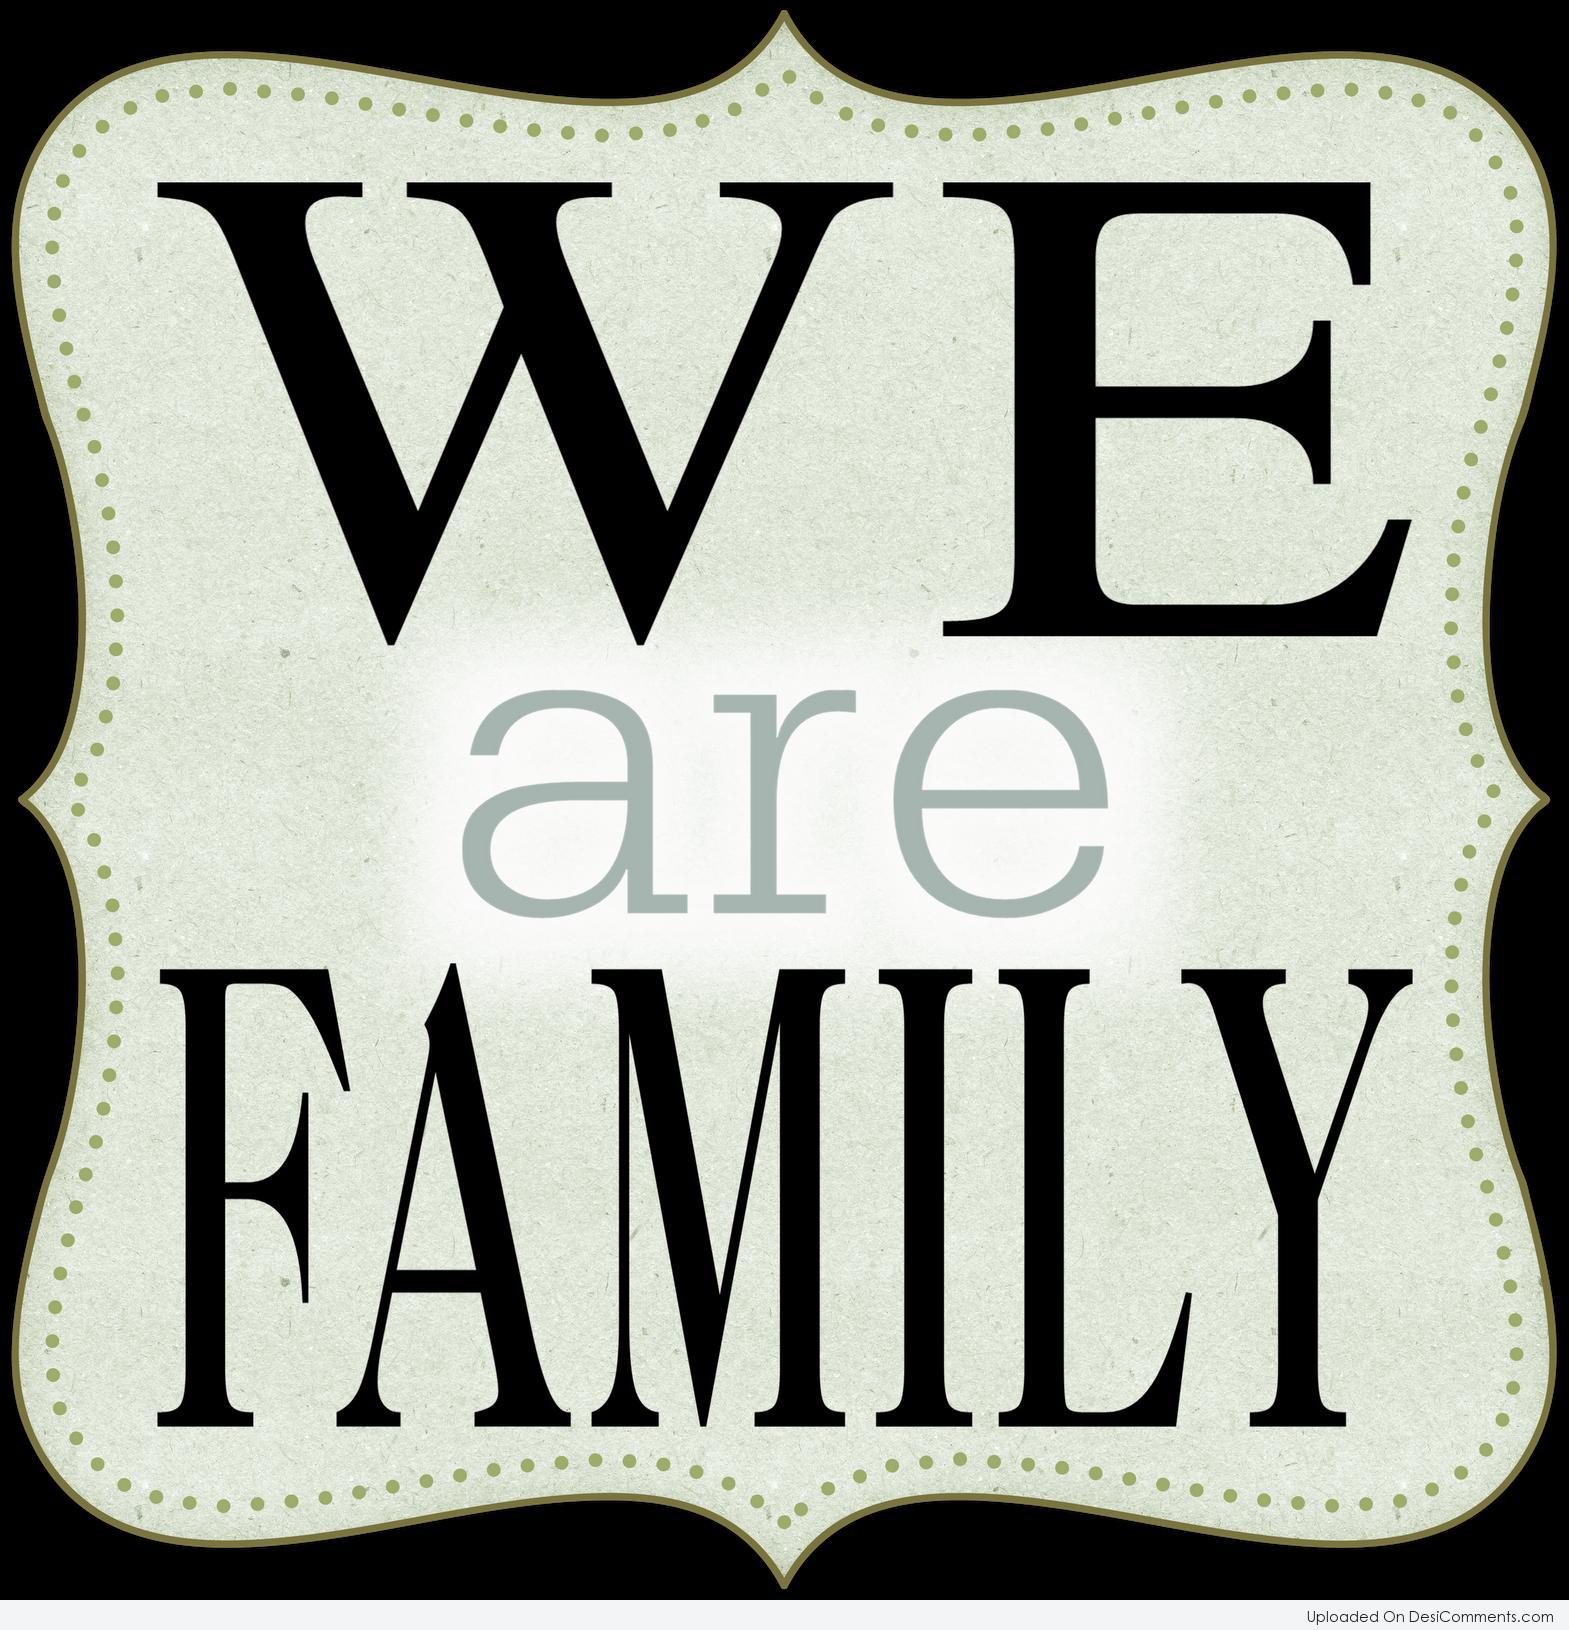 We Are Family - DesiComments.com